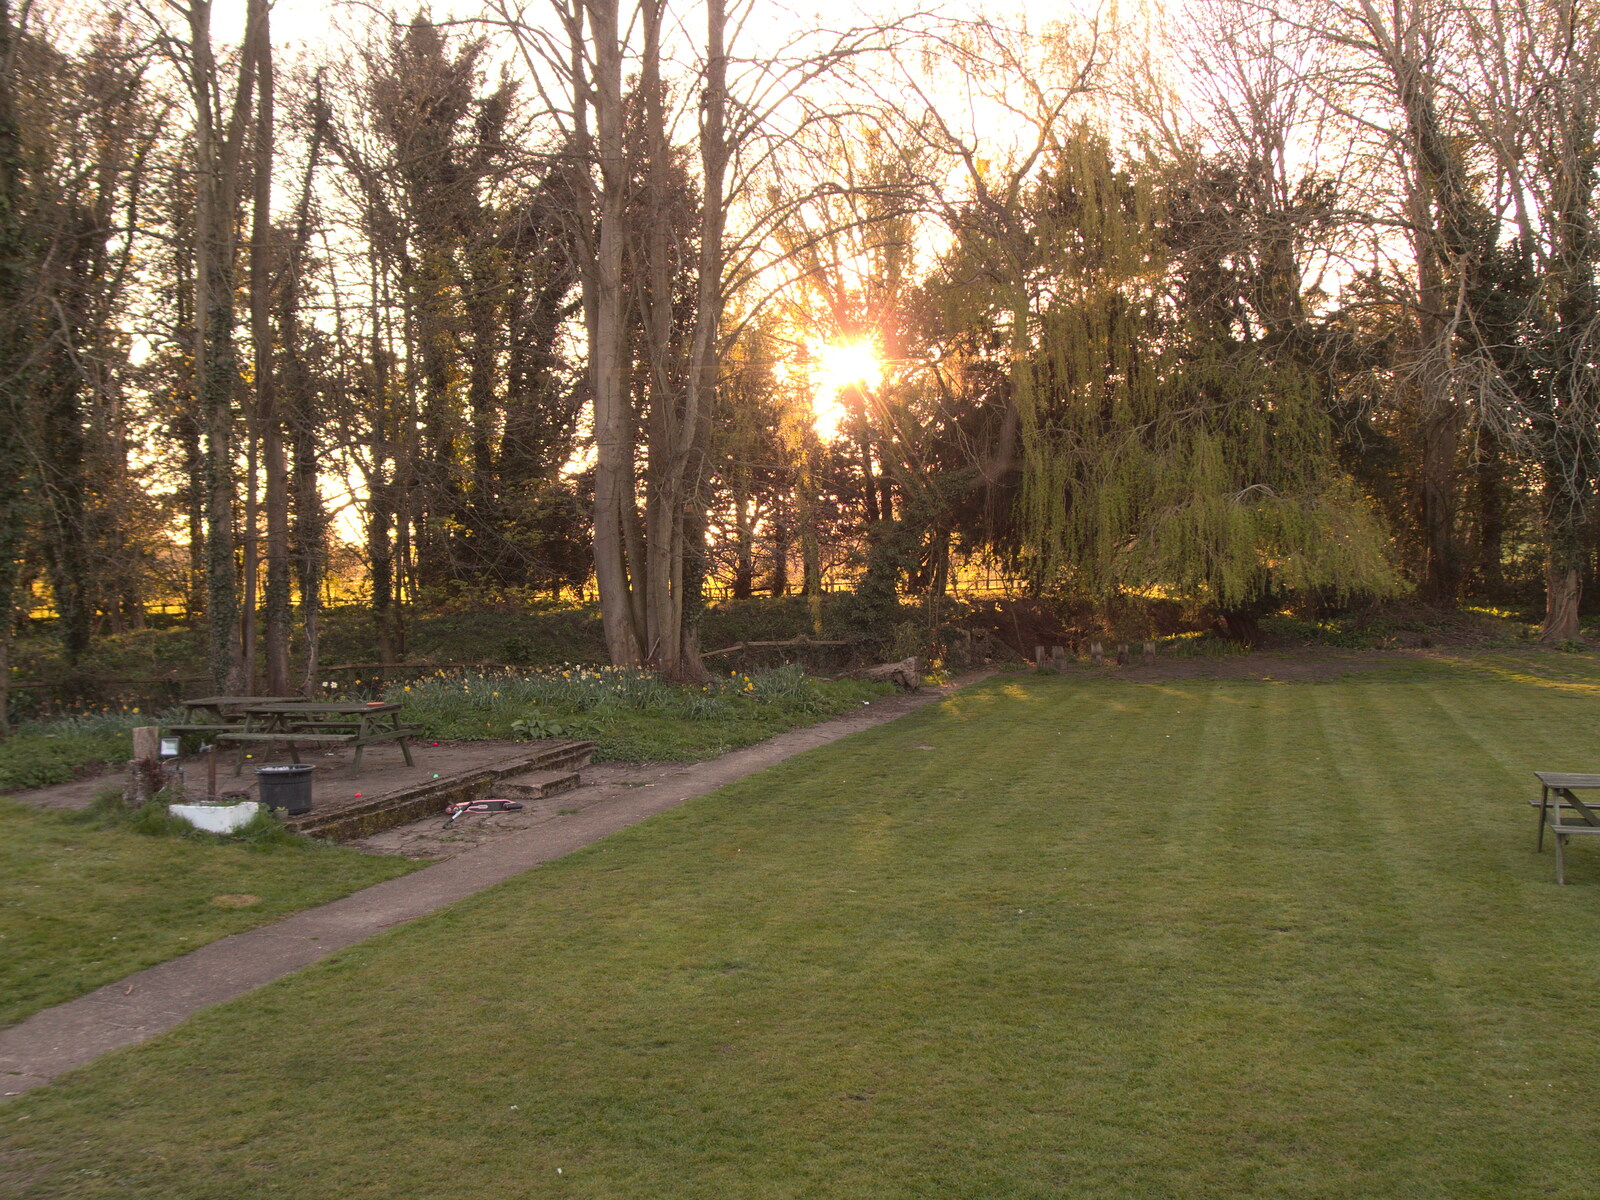 The sun sets, taking any warmth with it from BSCC Beer Garden Hypothermia, Hoxne and Brome, Suffolk - 22nd April 2021